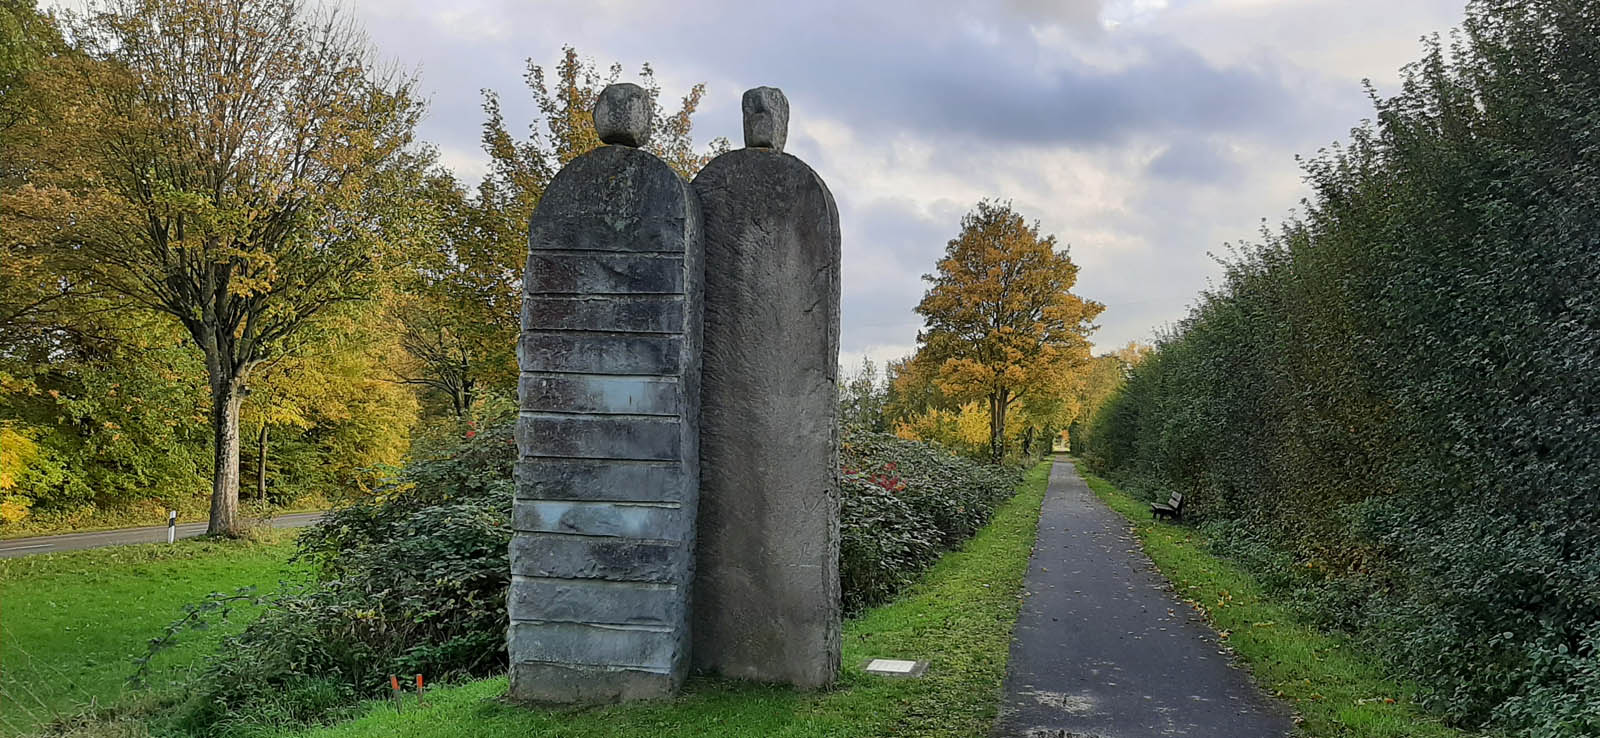 Two stone sculptures on the left of the bike path